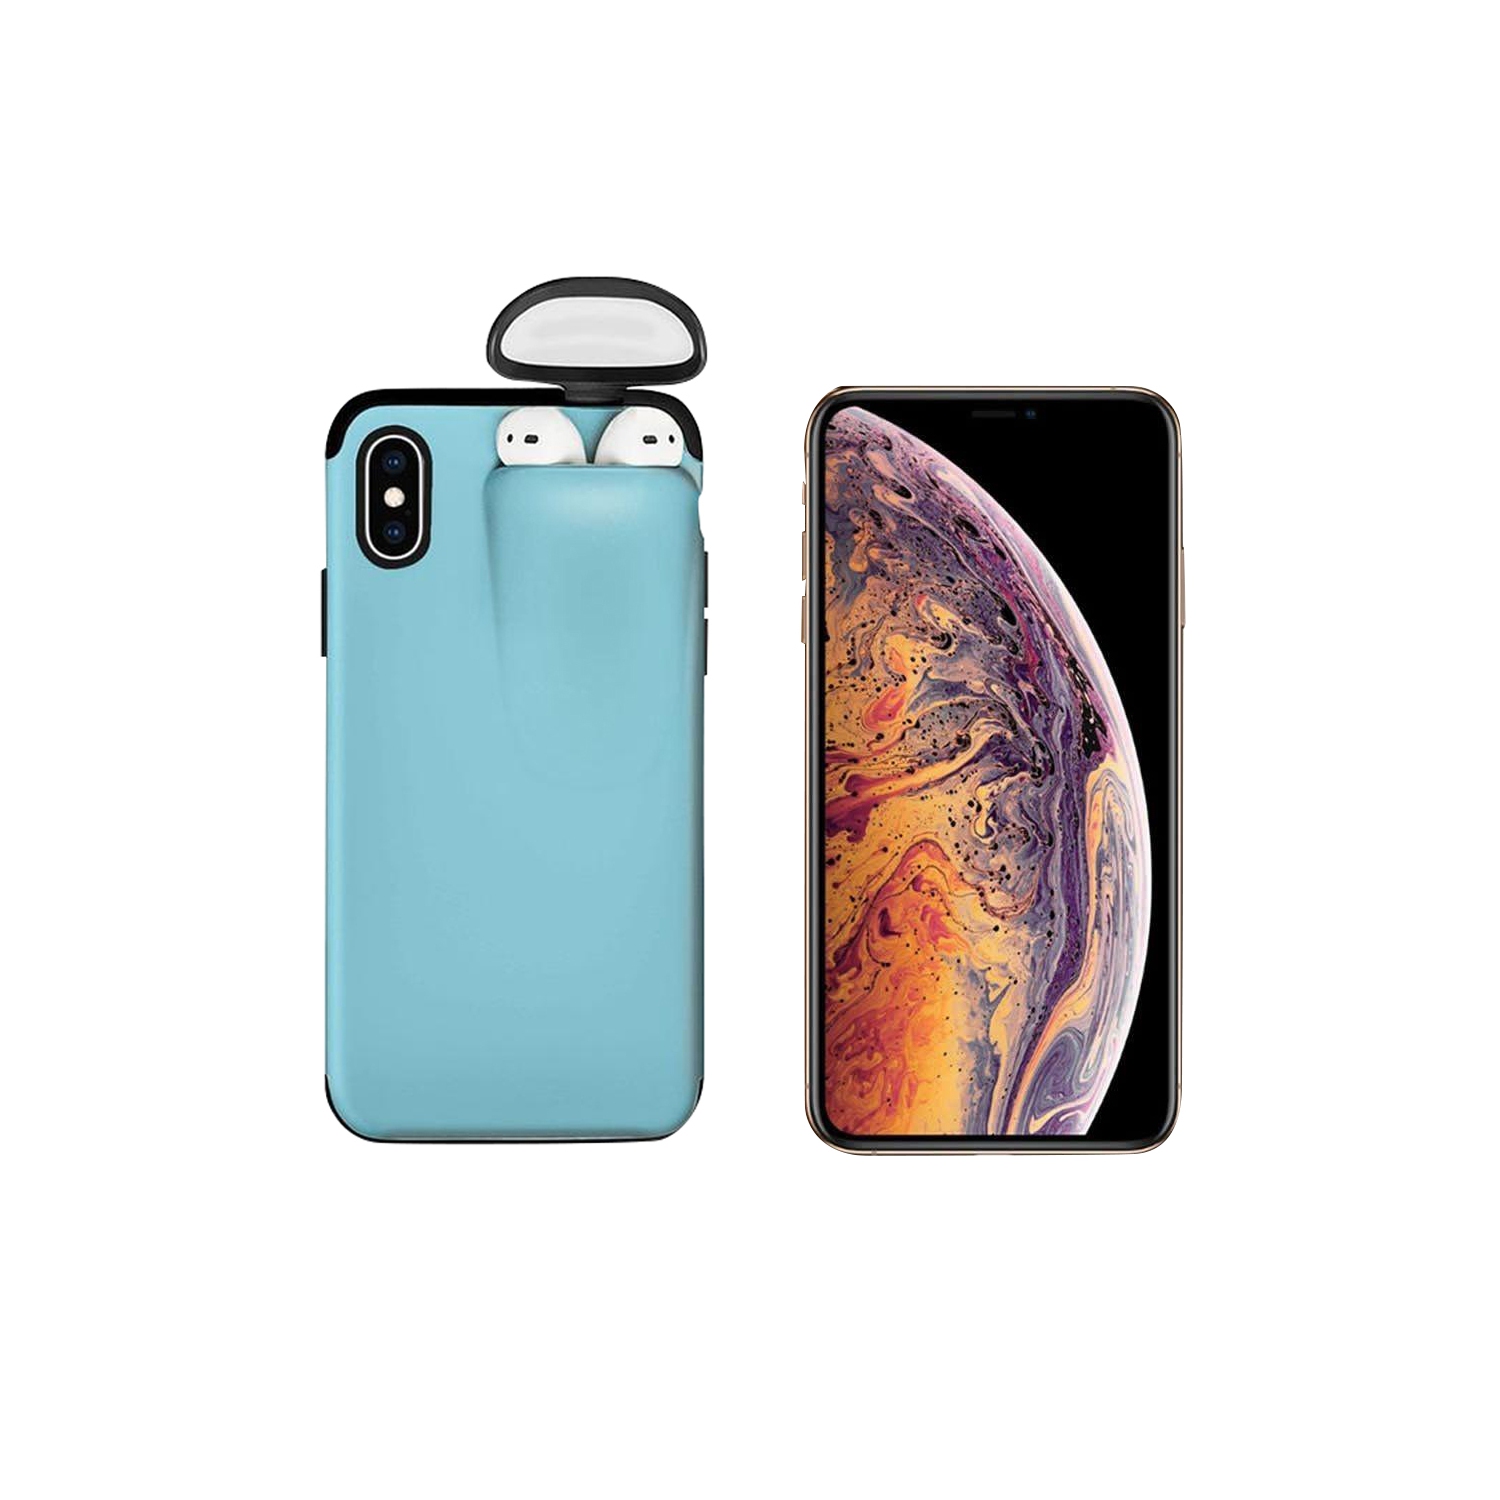 Unified Protection Silicone Gel Rubber 2 in 1 AirPods Phone Cover Case For iPhone XS Max (AirPods 1/2 Only) - Sky Blue